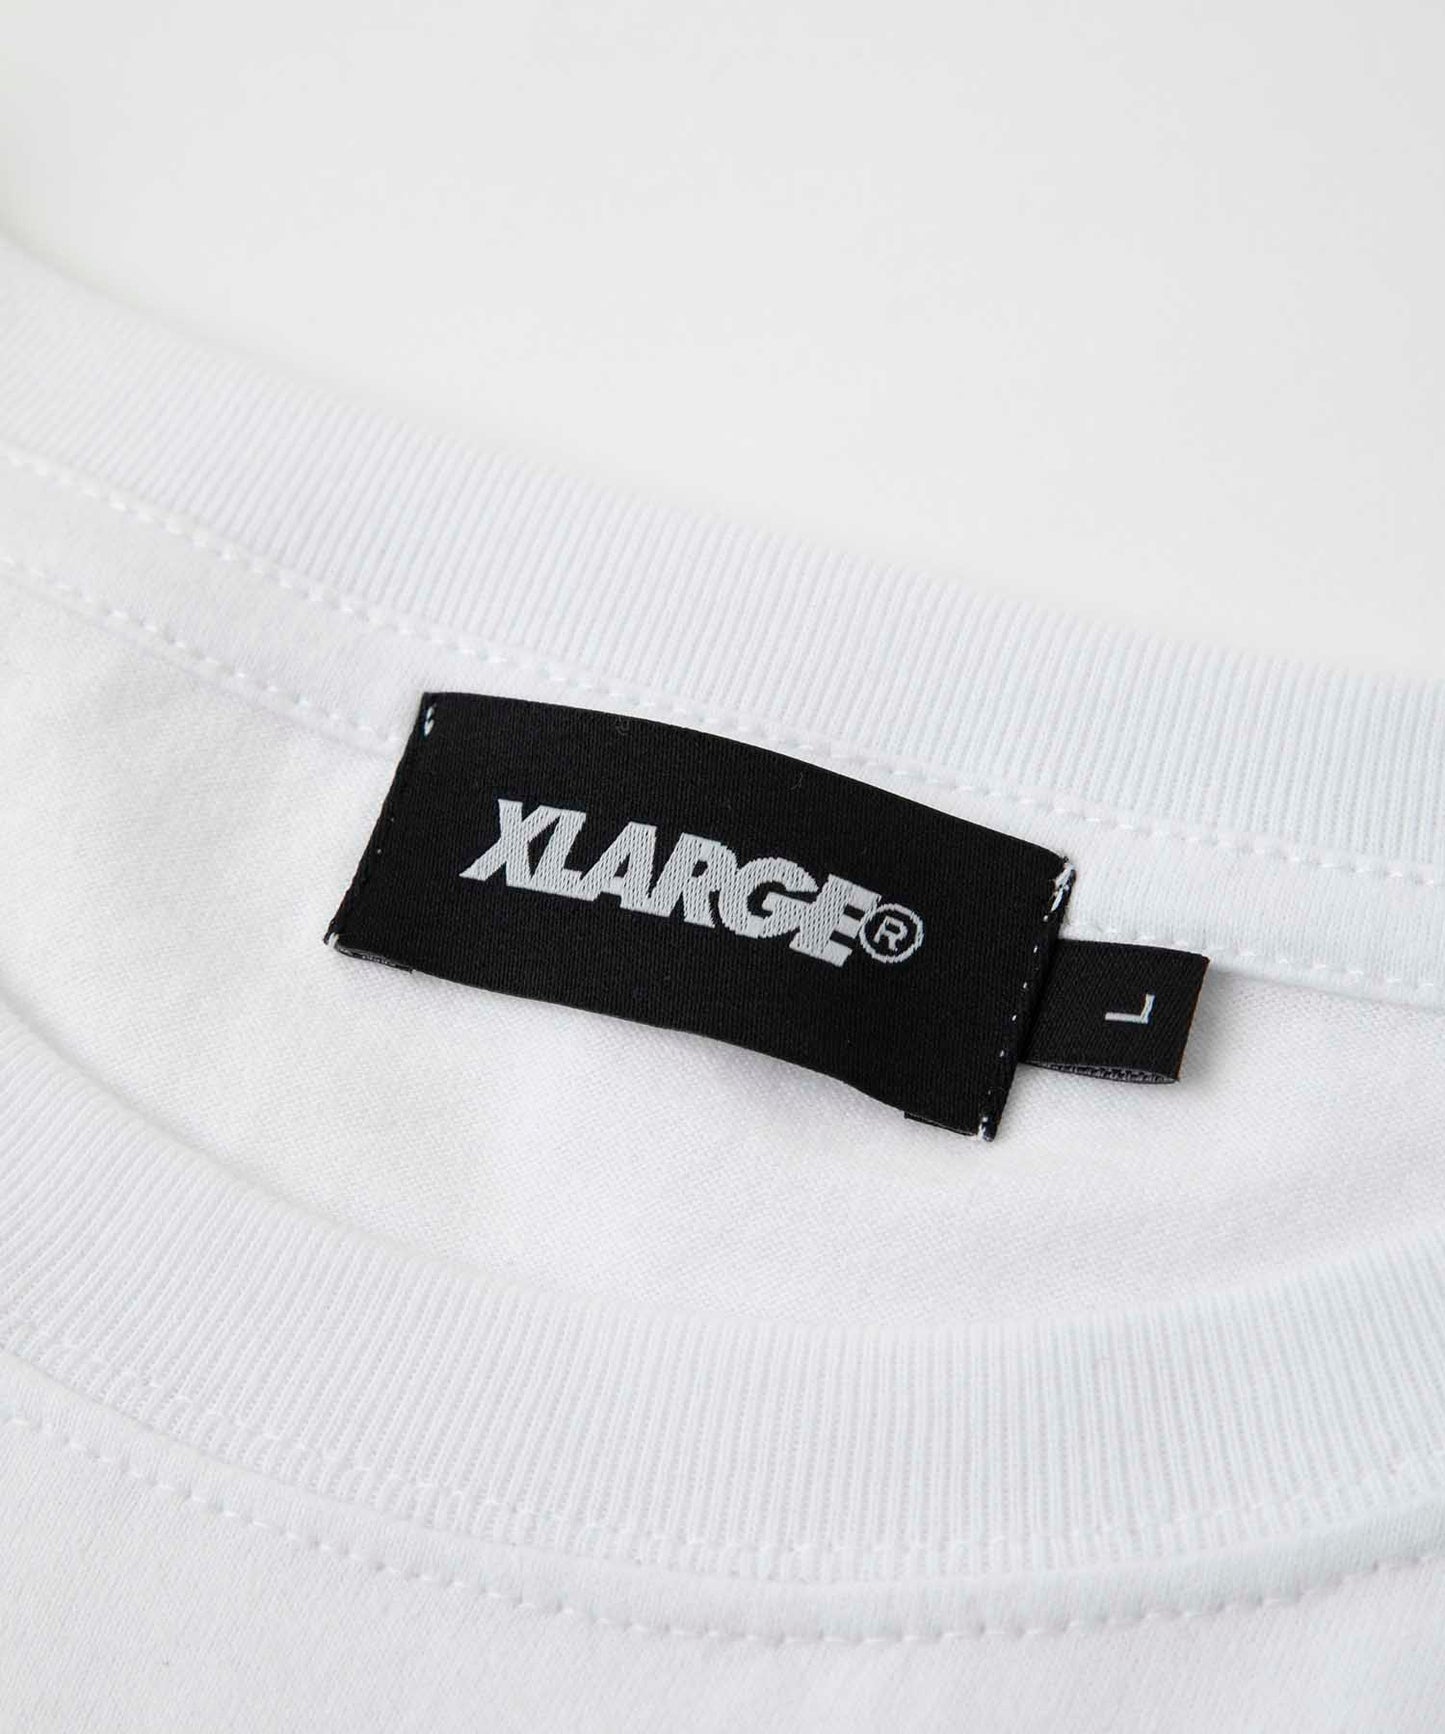 L/S TEE EMBROIDERY STANDARD LOGO T-SHIRT XLARGE  